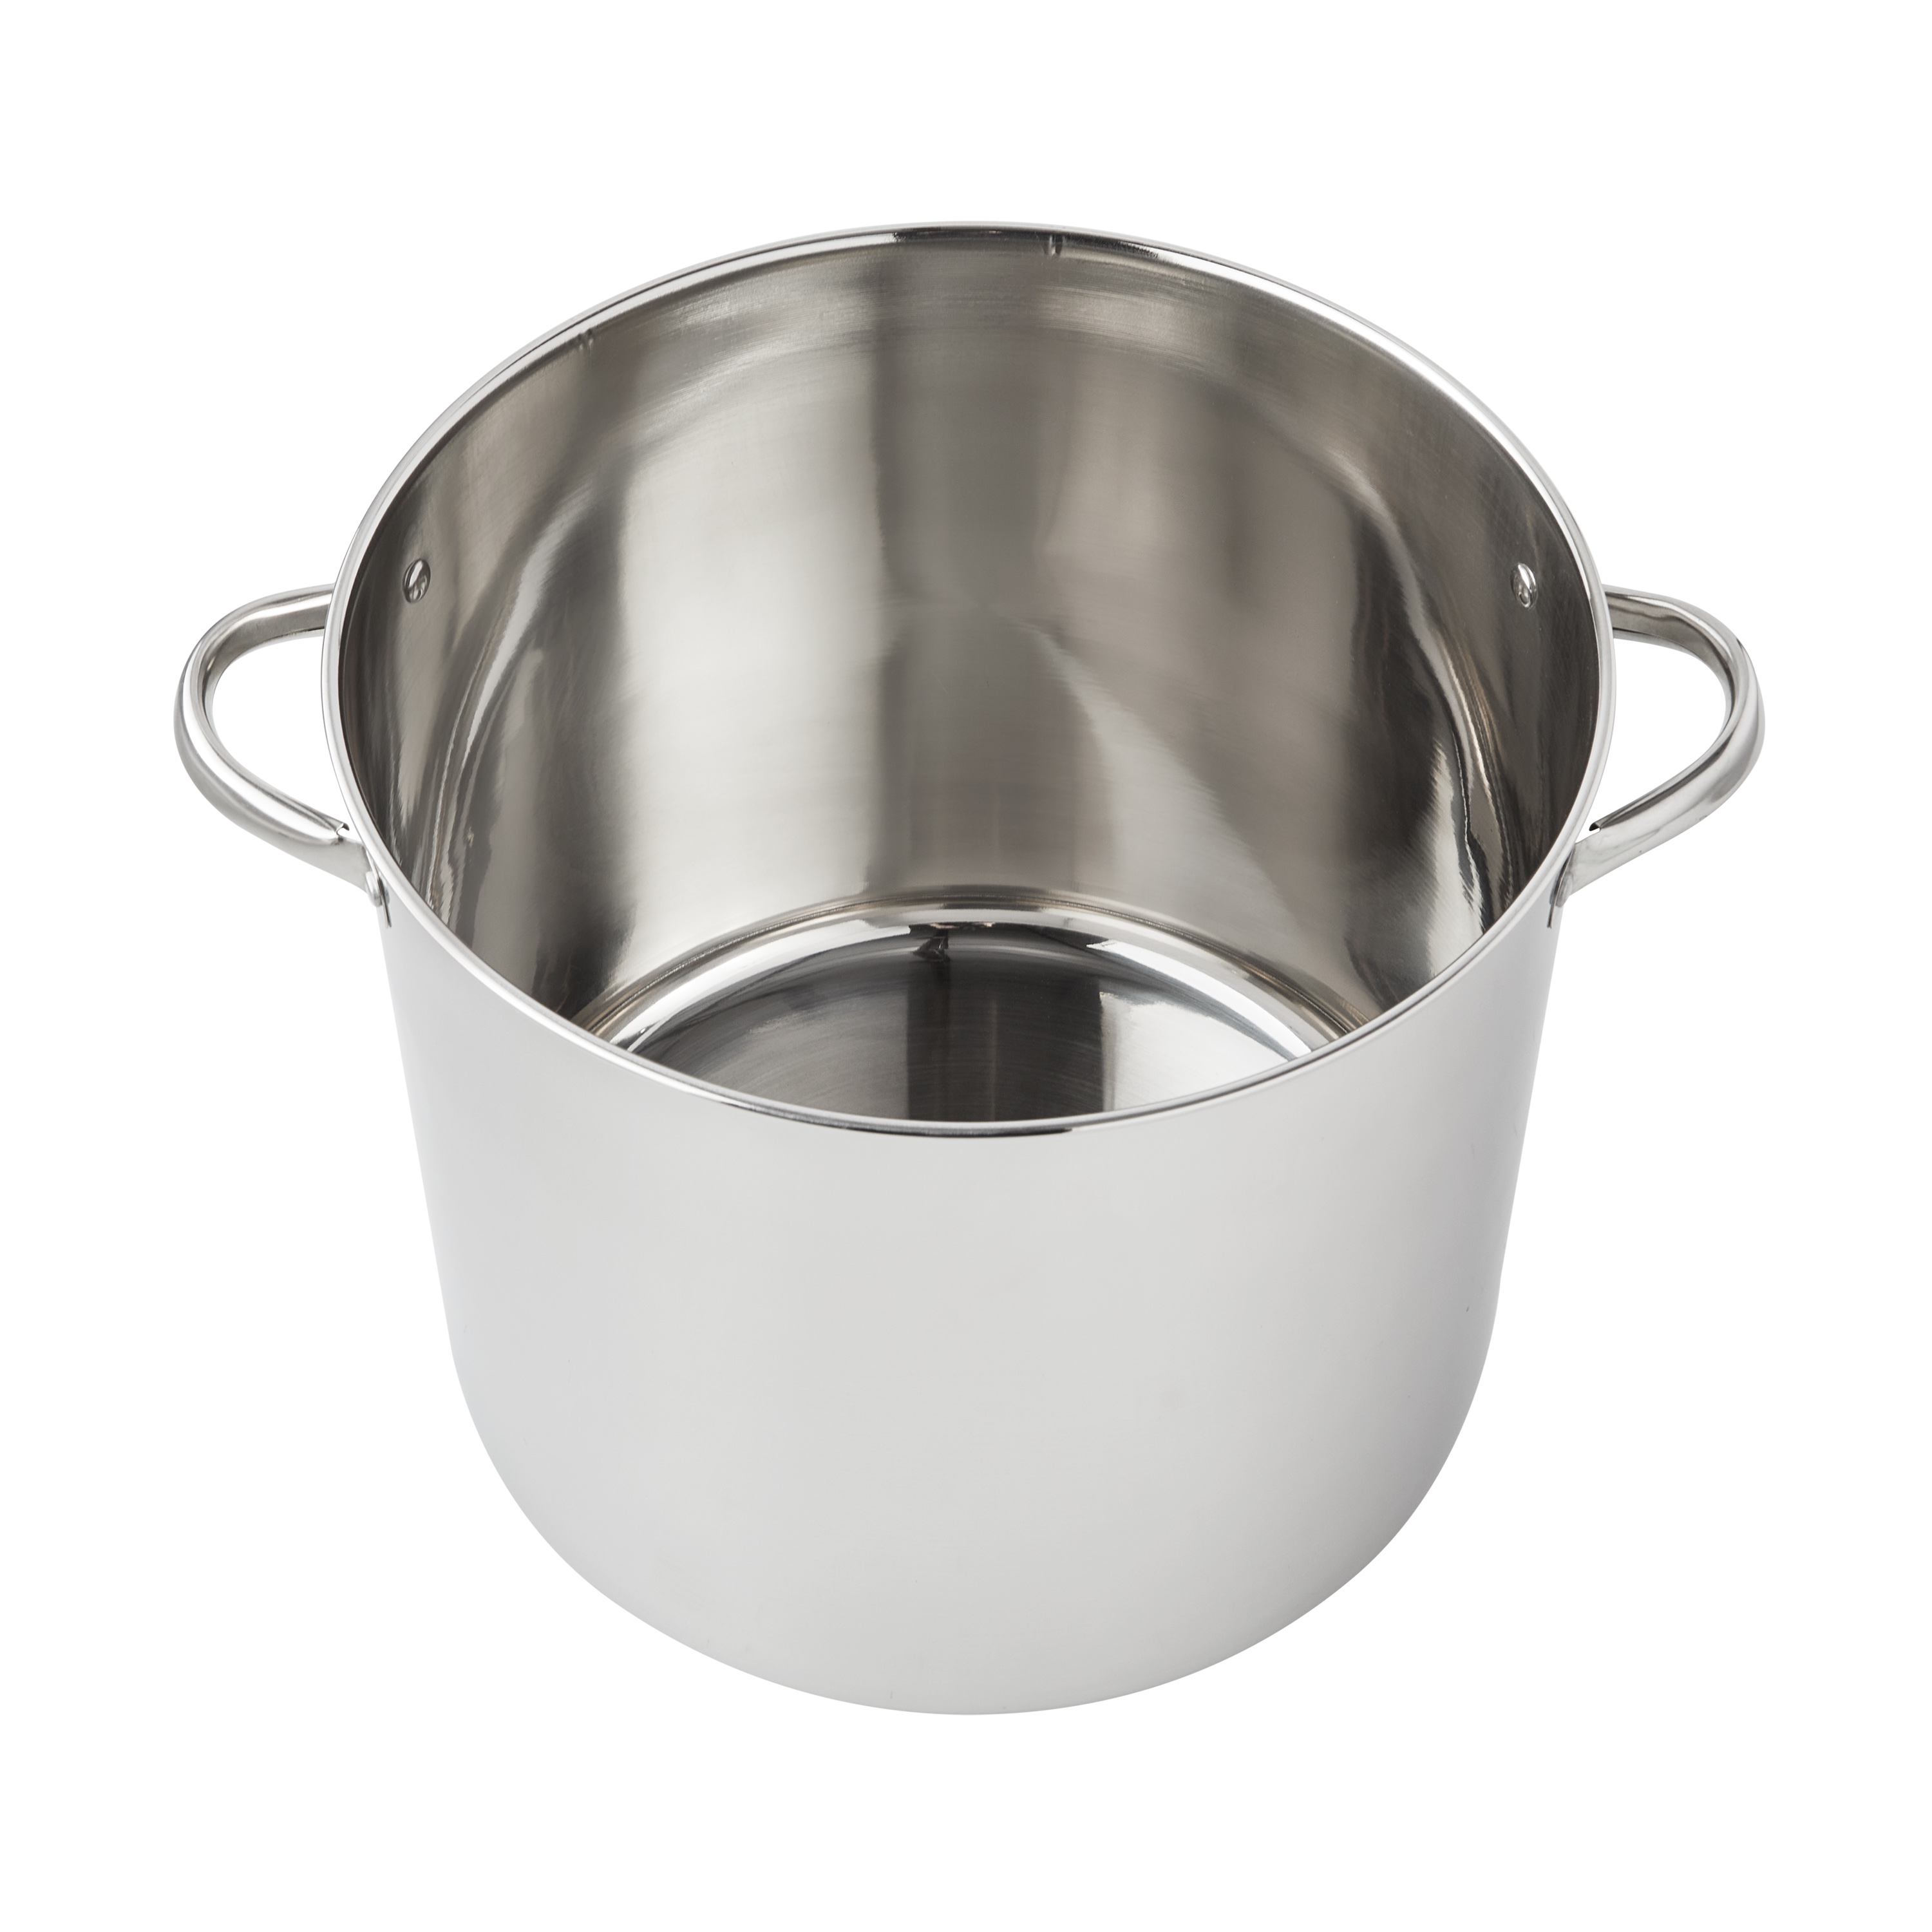 Mainstays Stainless Steel 20-Quart Stock Pot with Glass Lid - image 4 of 6